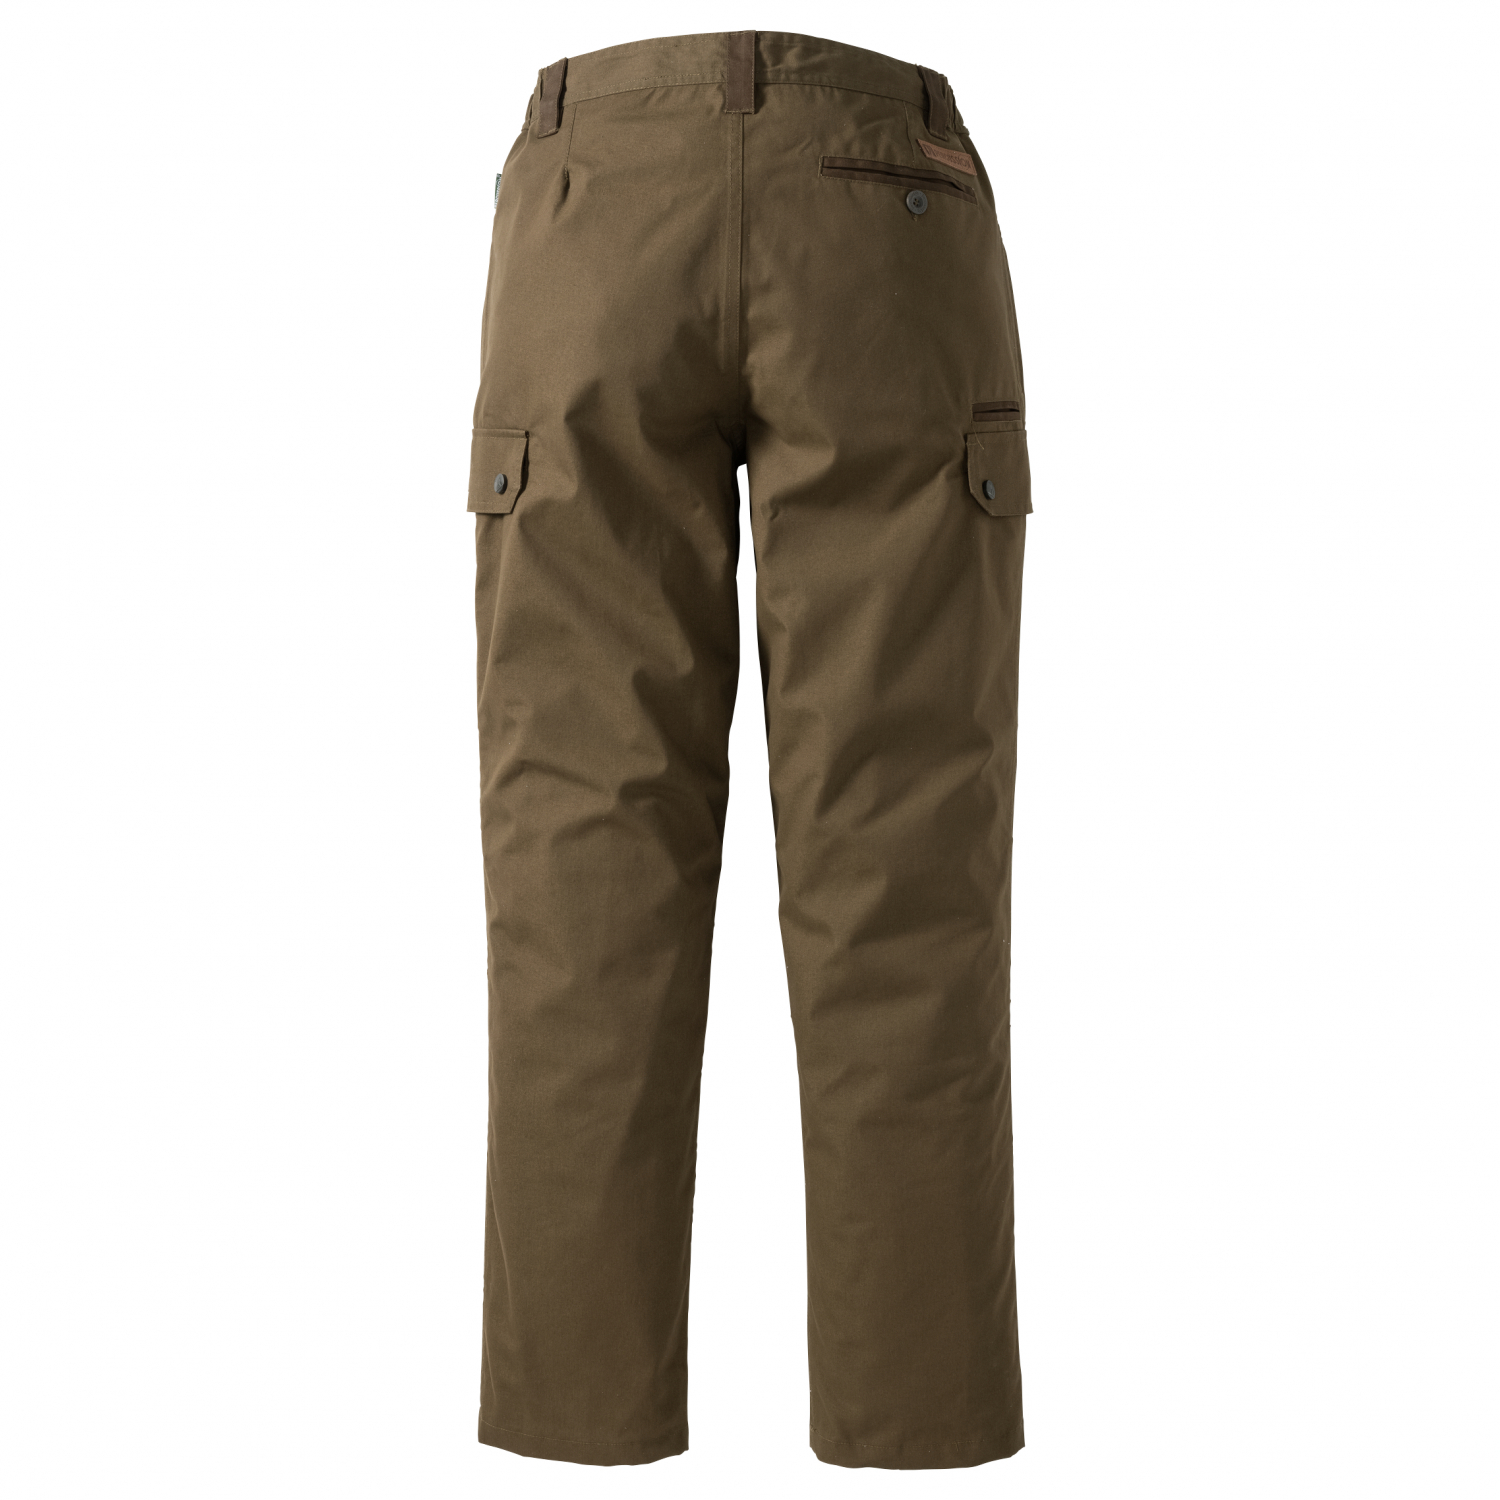 Percussion Mens Trousers Imperlight at low prices | Askari Hunting Shop